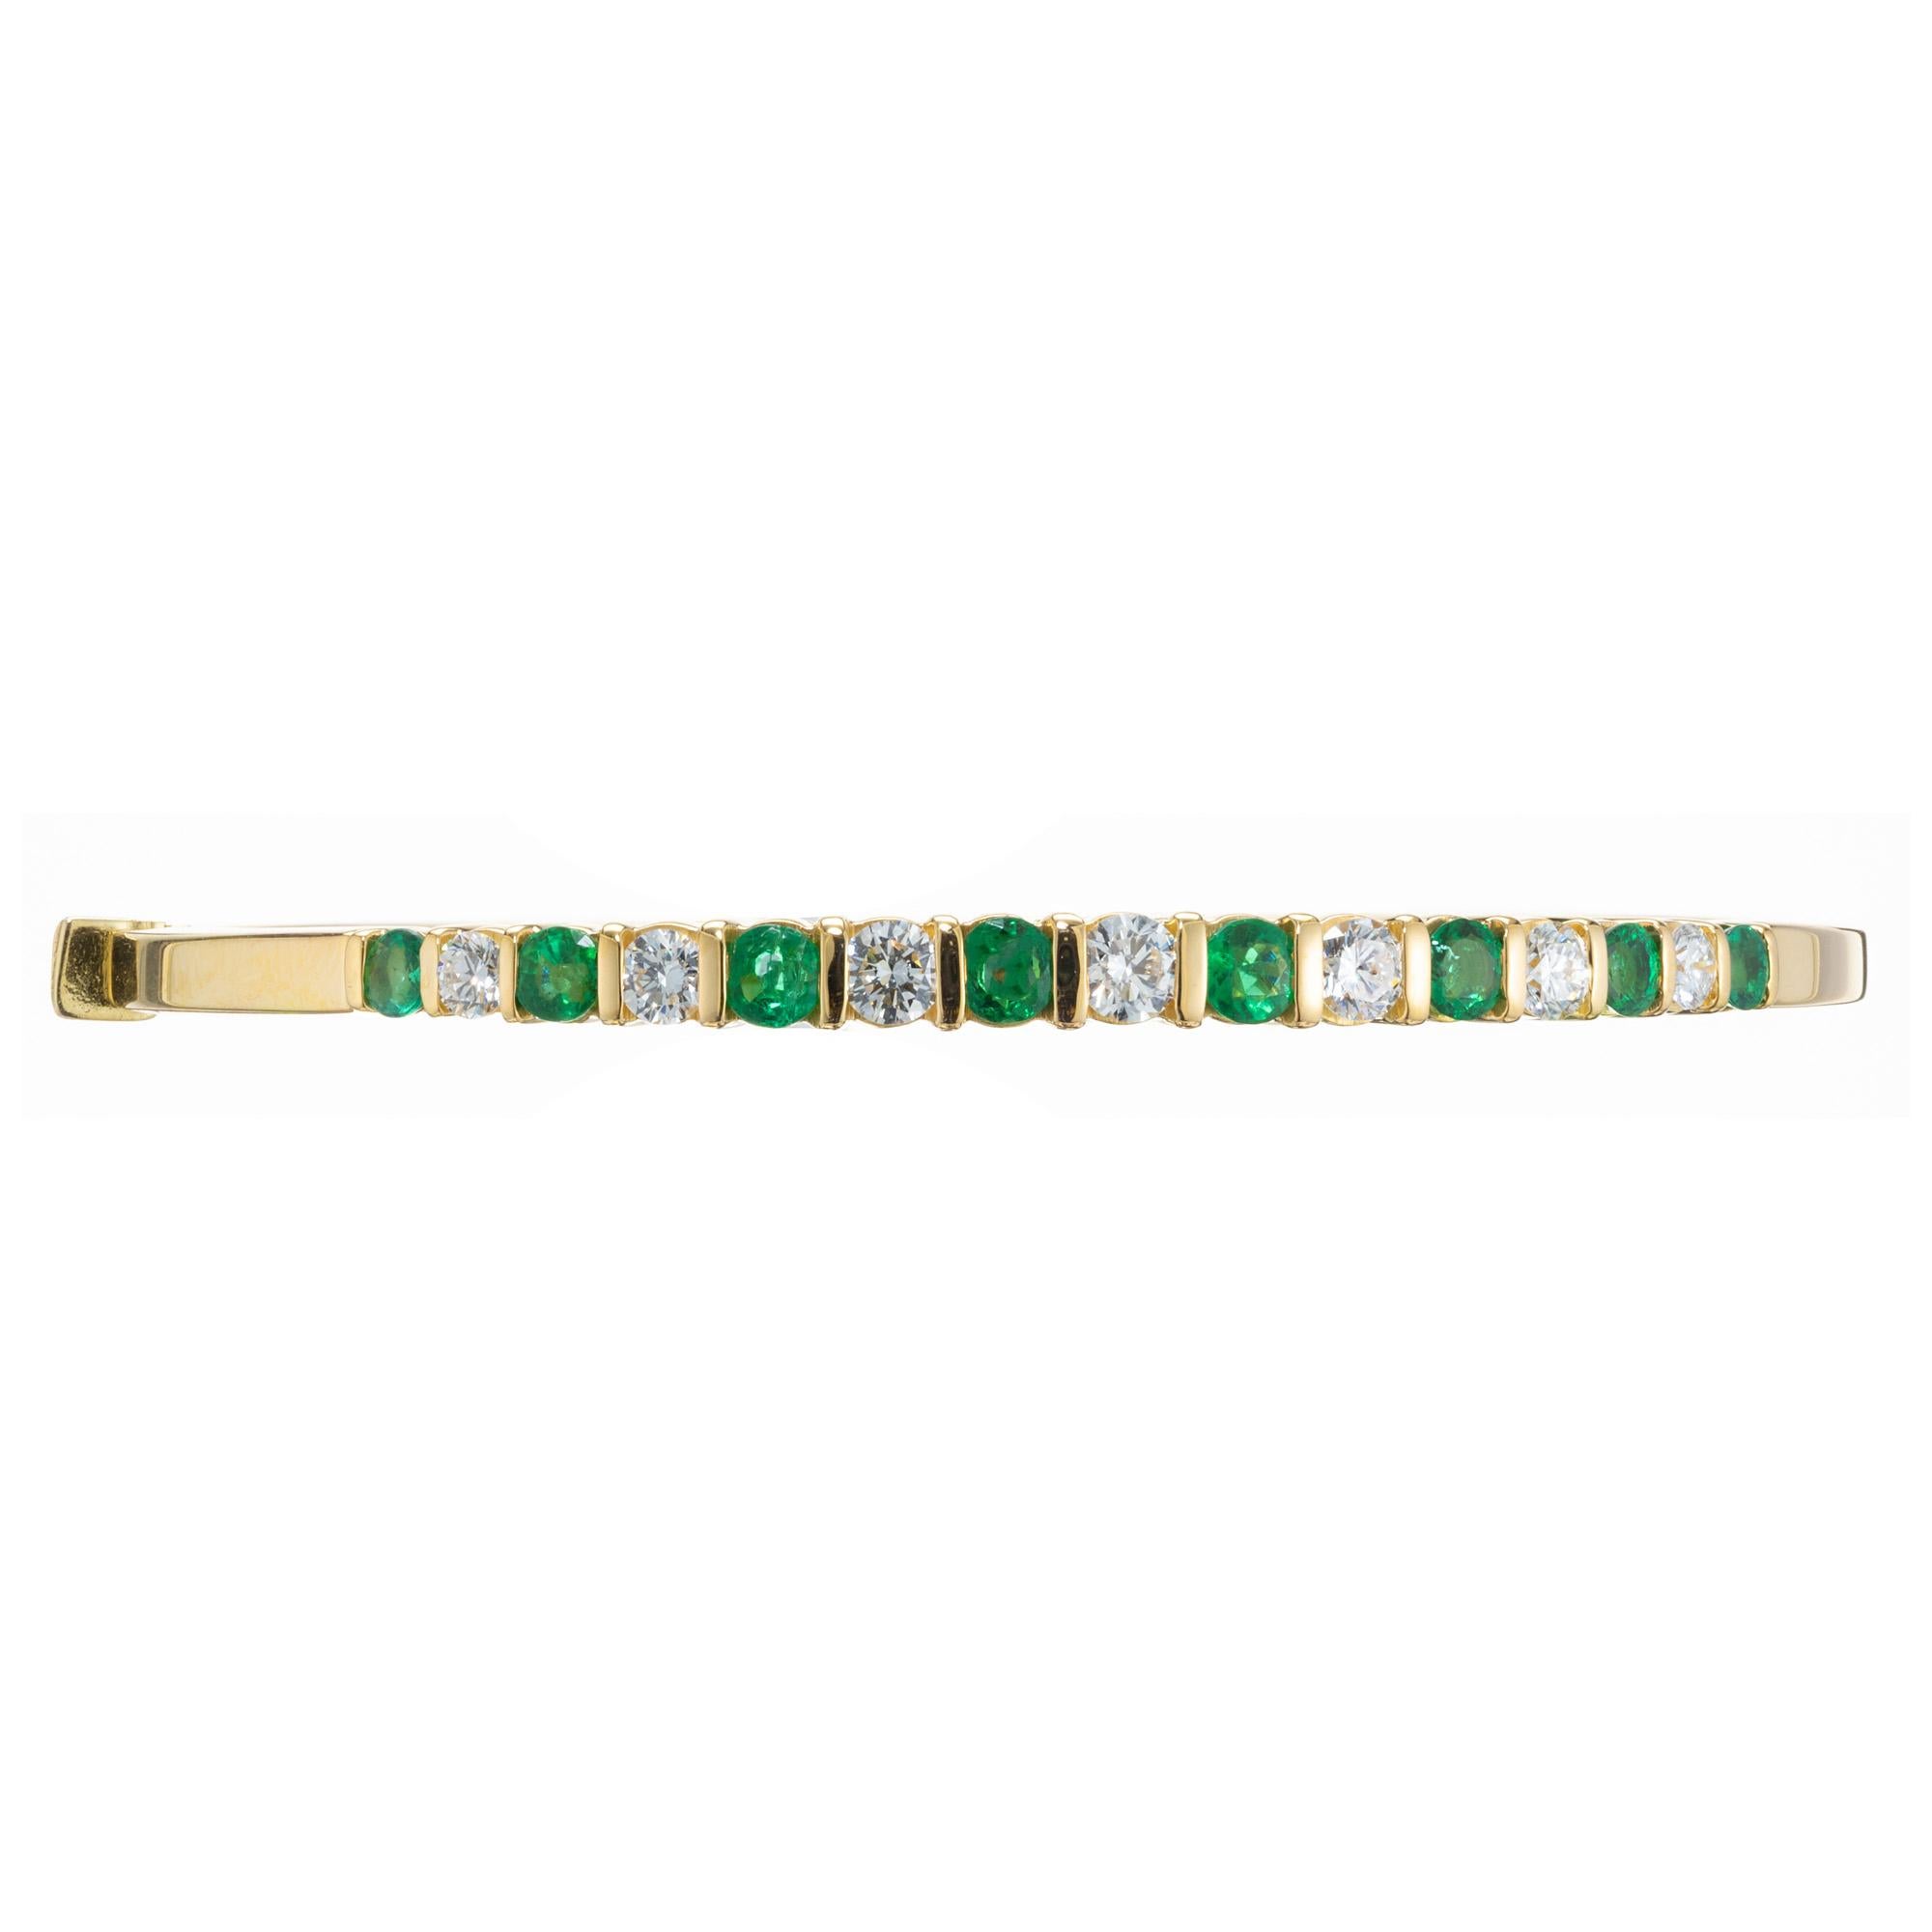 Emerald and diamond 18k yellow gold bangle bracelet. 8 round cut emeralds totaling 1.20cts that alternate with 7 round brilliant cut diamonds. The stone are separated by yellow gold bars. The emeralds are crisp and bright green complemented by